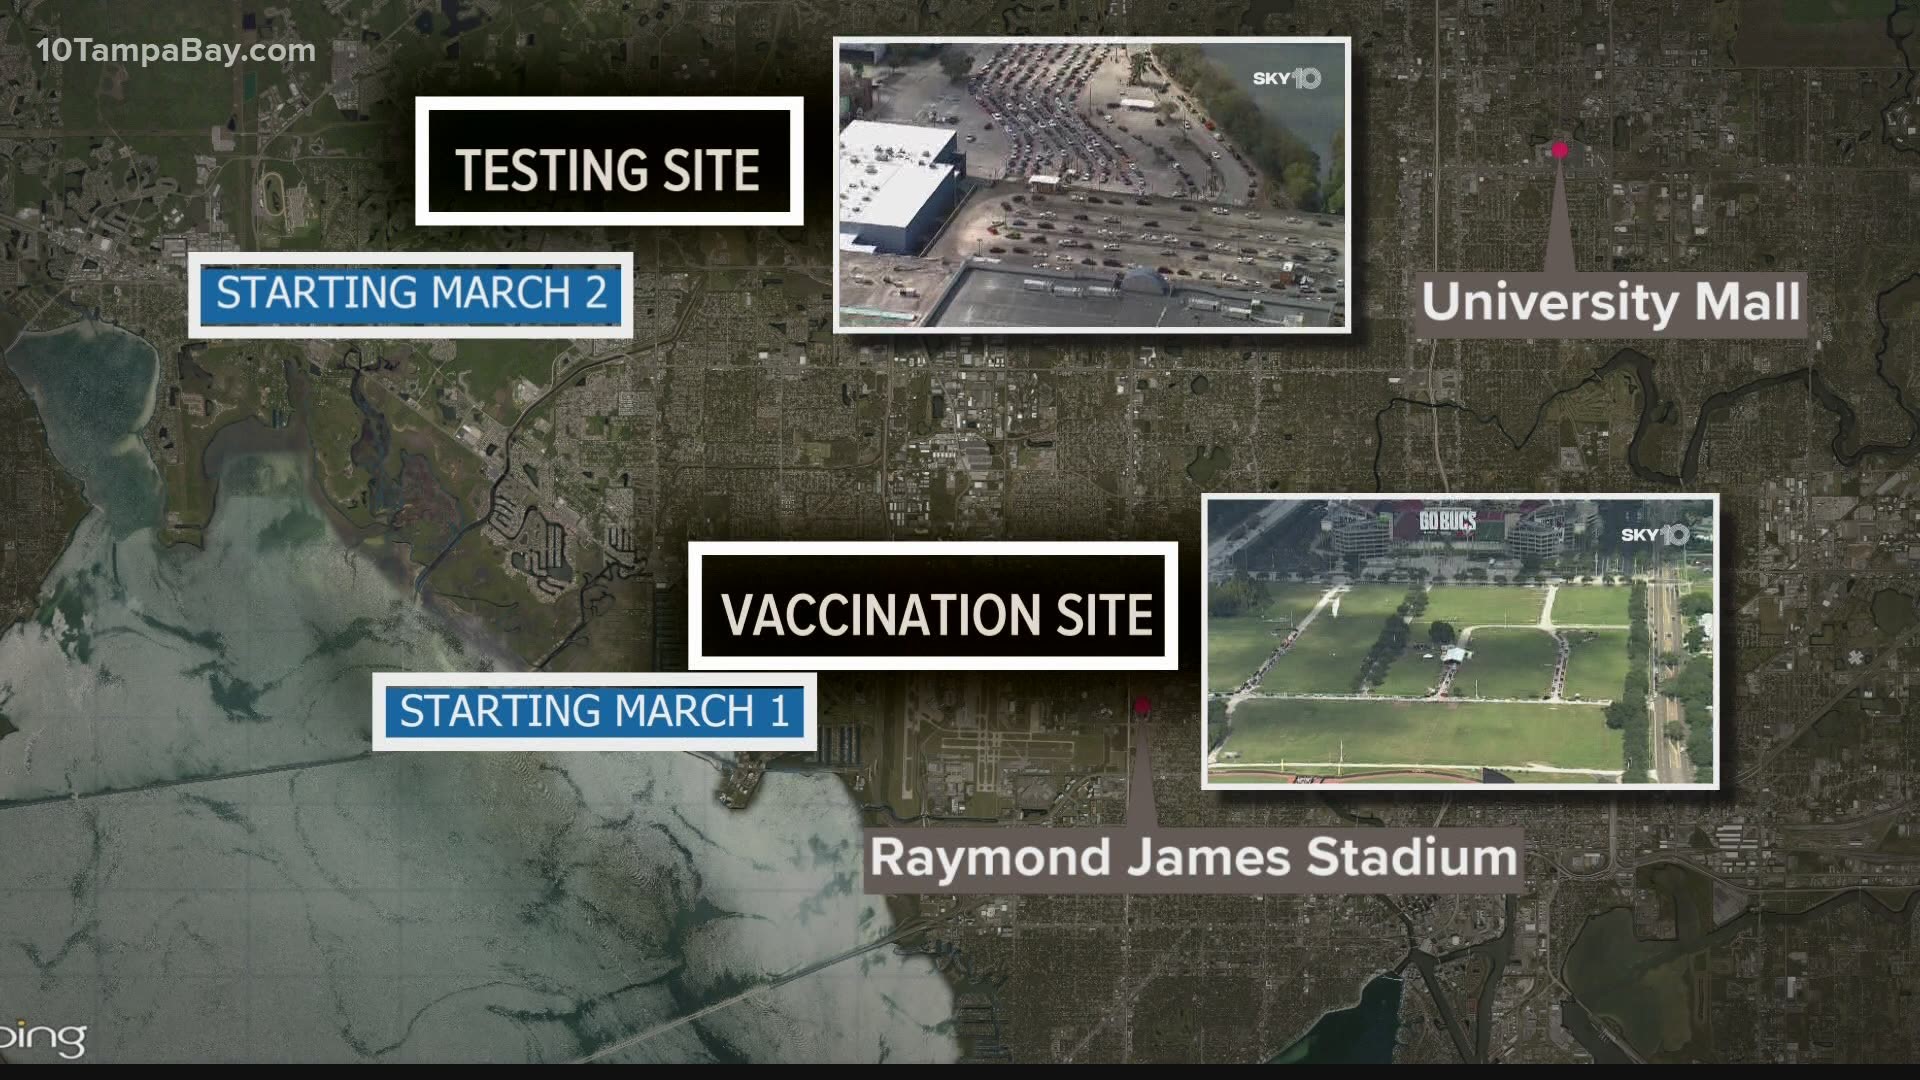 The state-supported vaccination site that was at University Mall has officially moved to its new site at Raymond James Stadium.